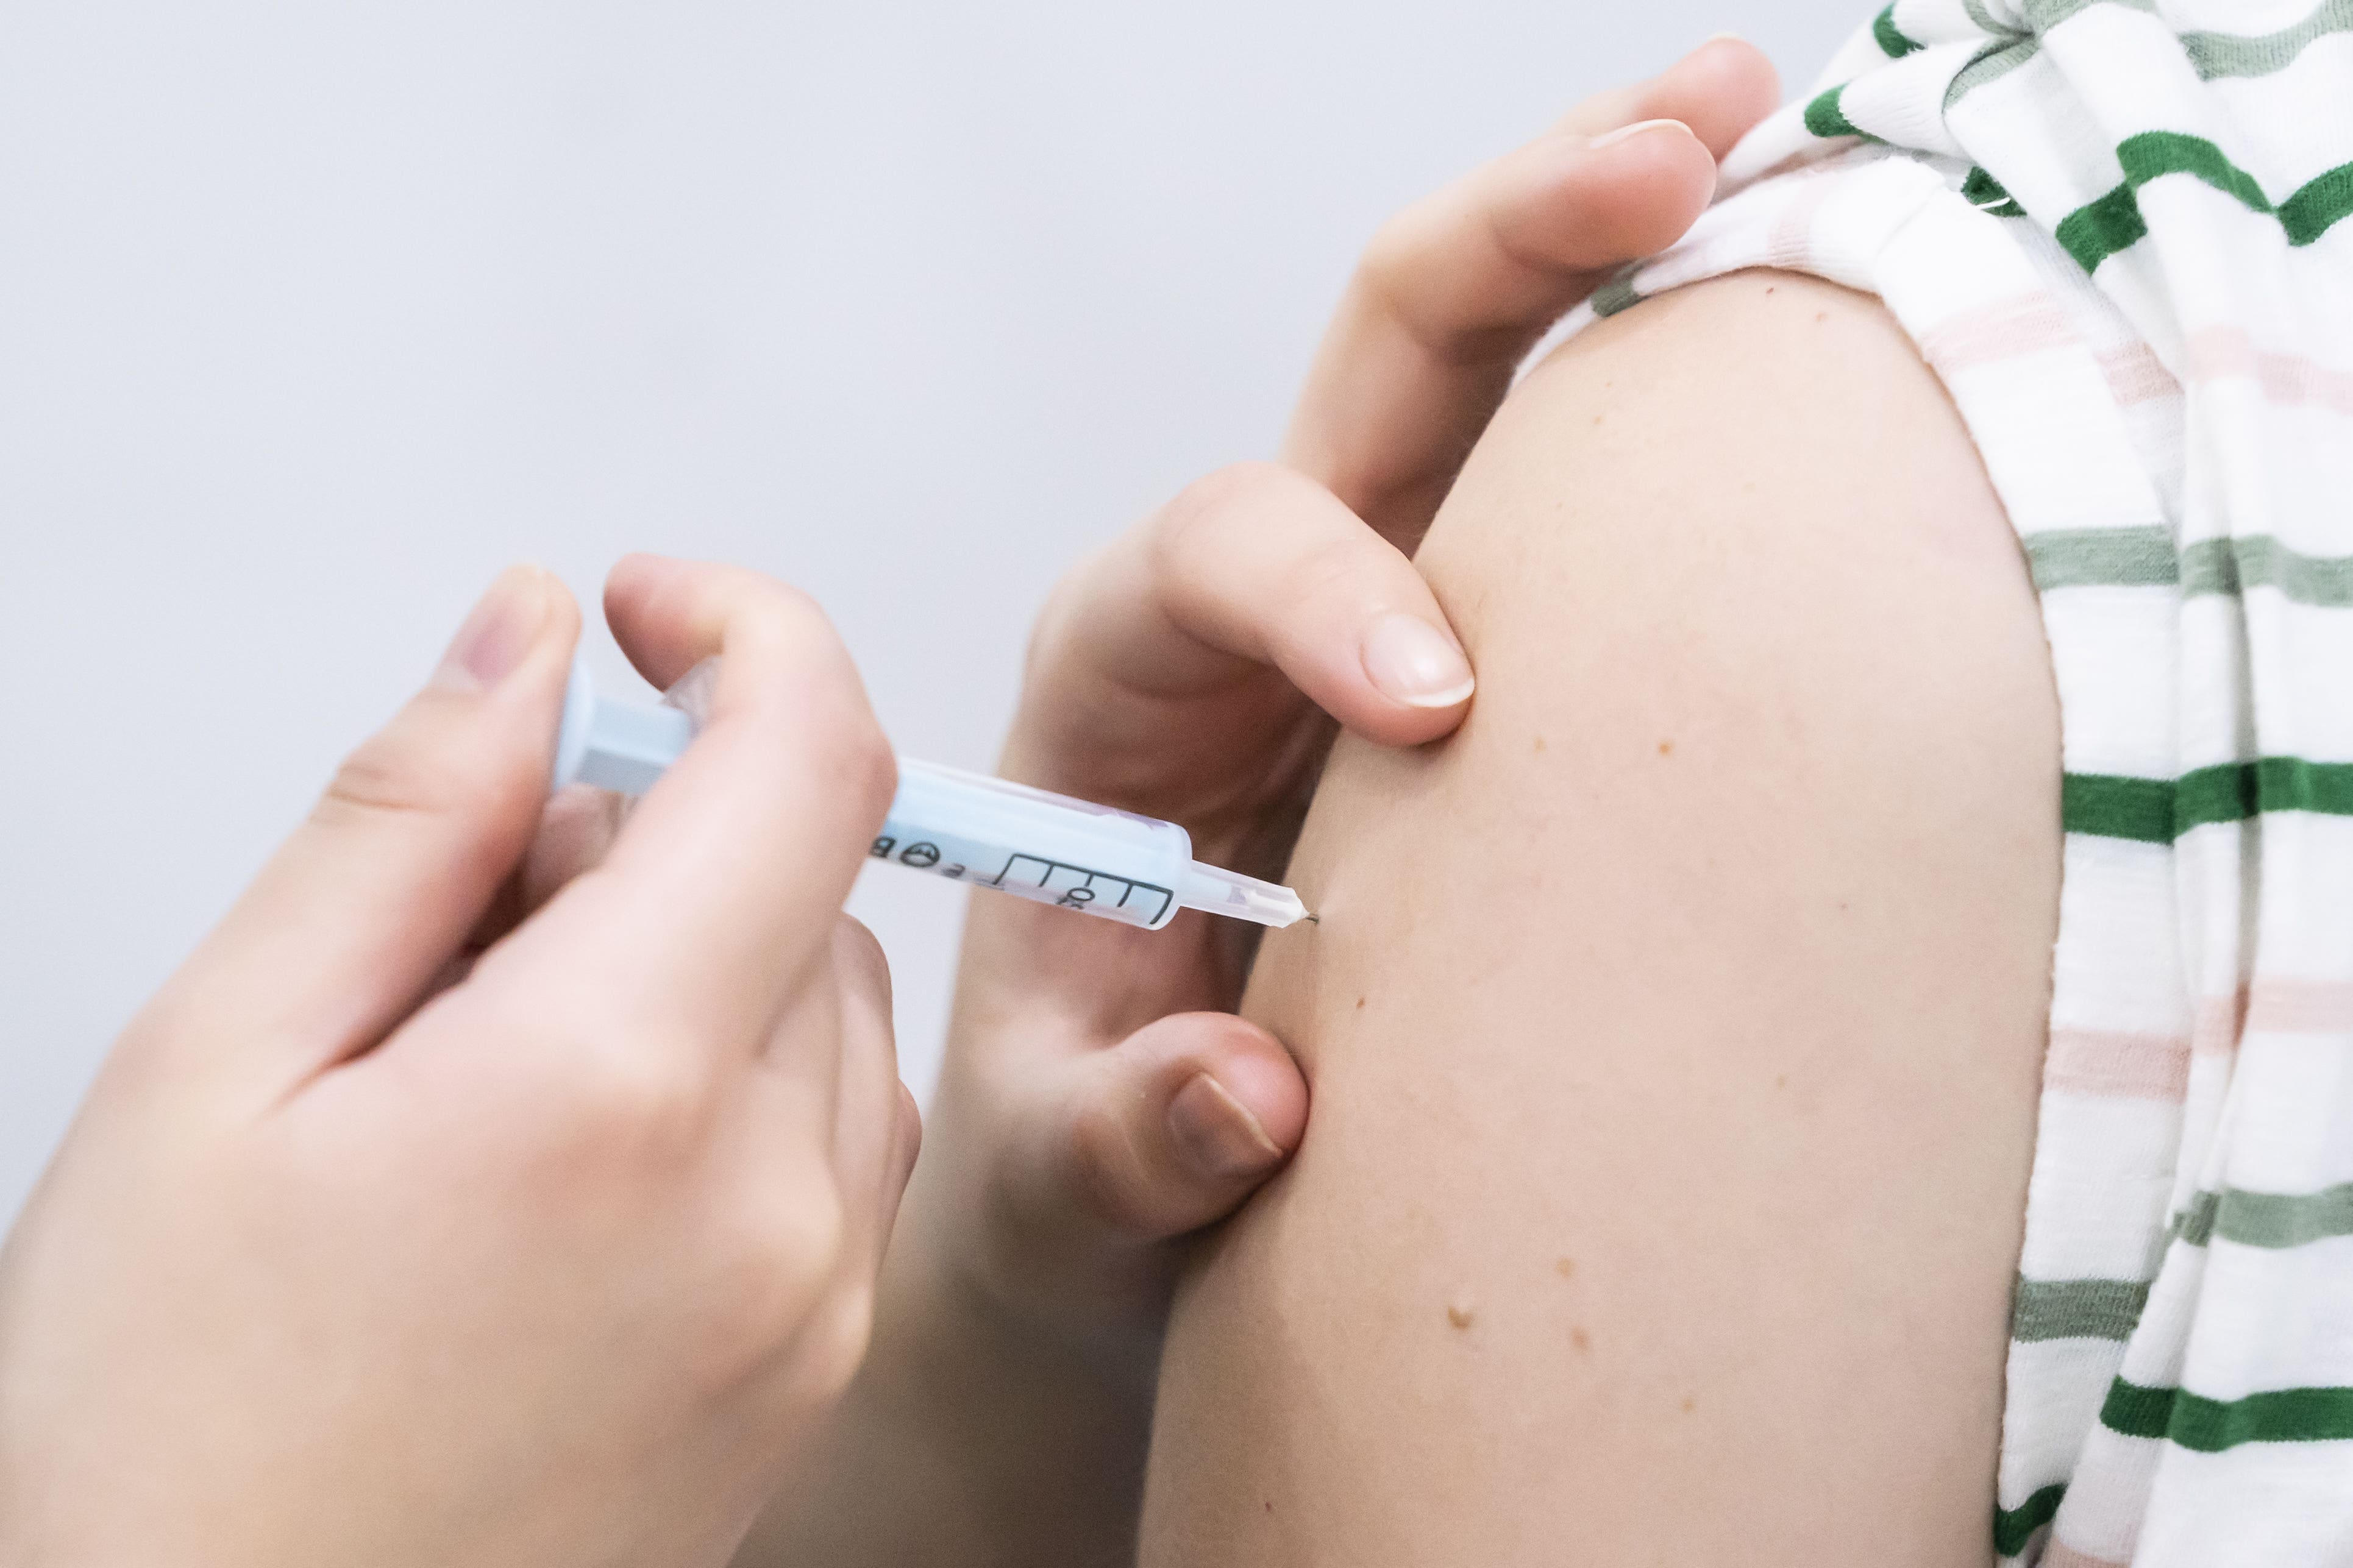 There are currently no Covid vaccines available to purchase privately in the UK